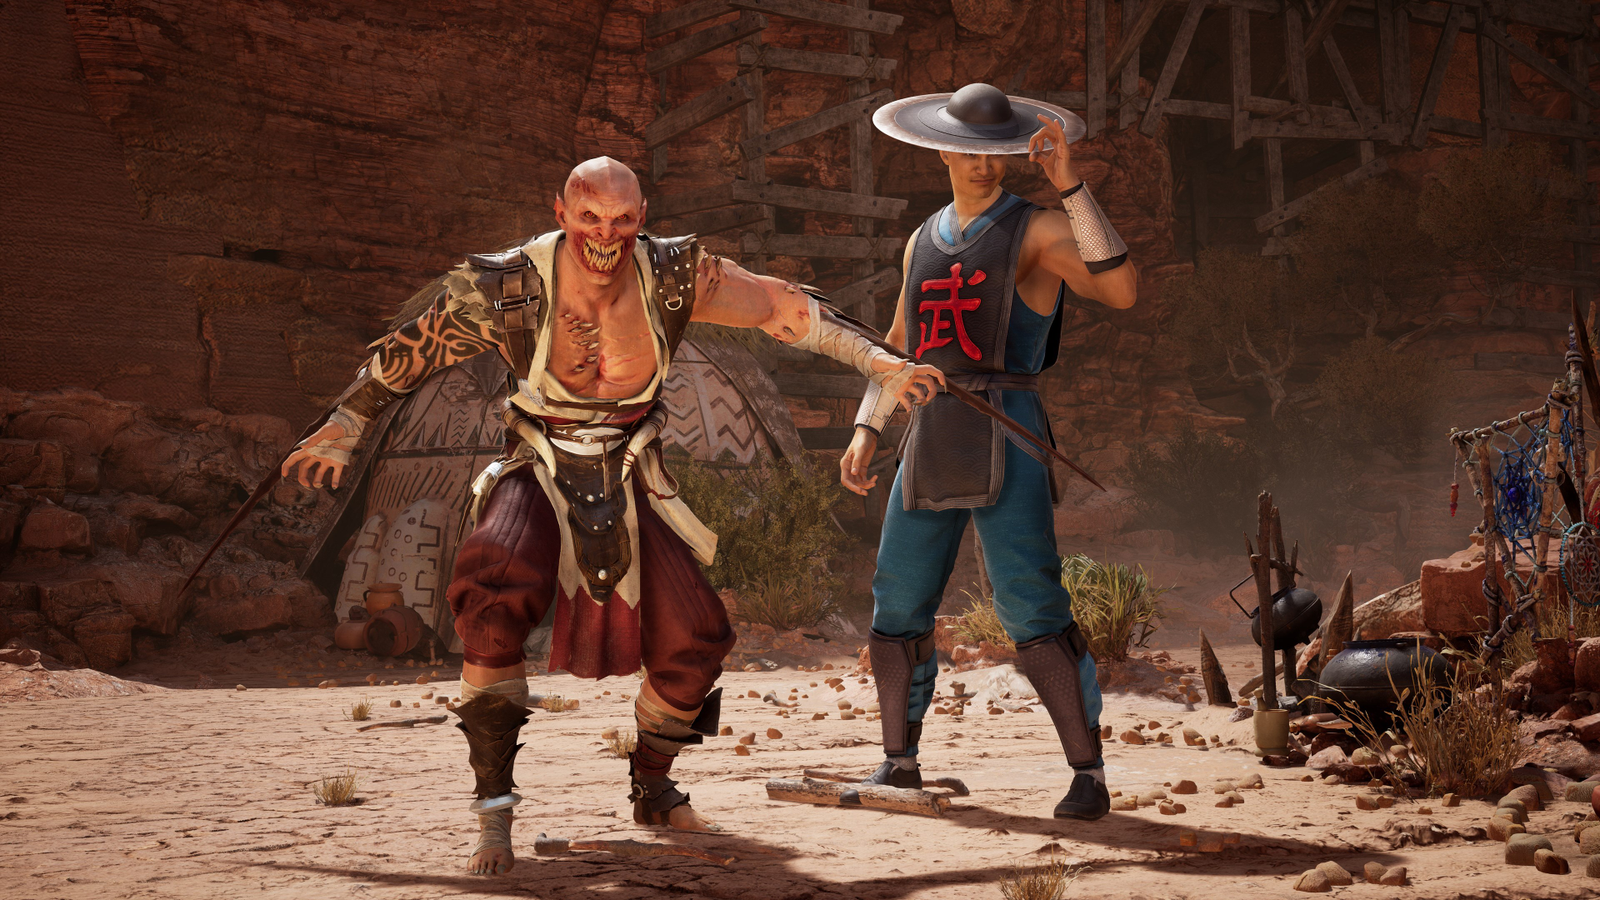 Mortal Kombat 11 review: A bloody good but familiar fighting game